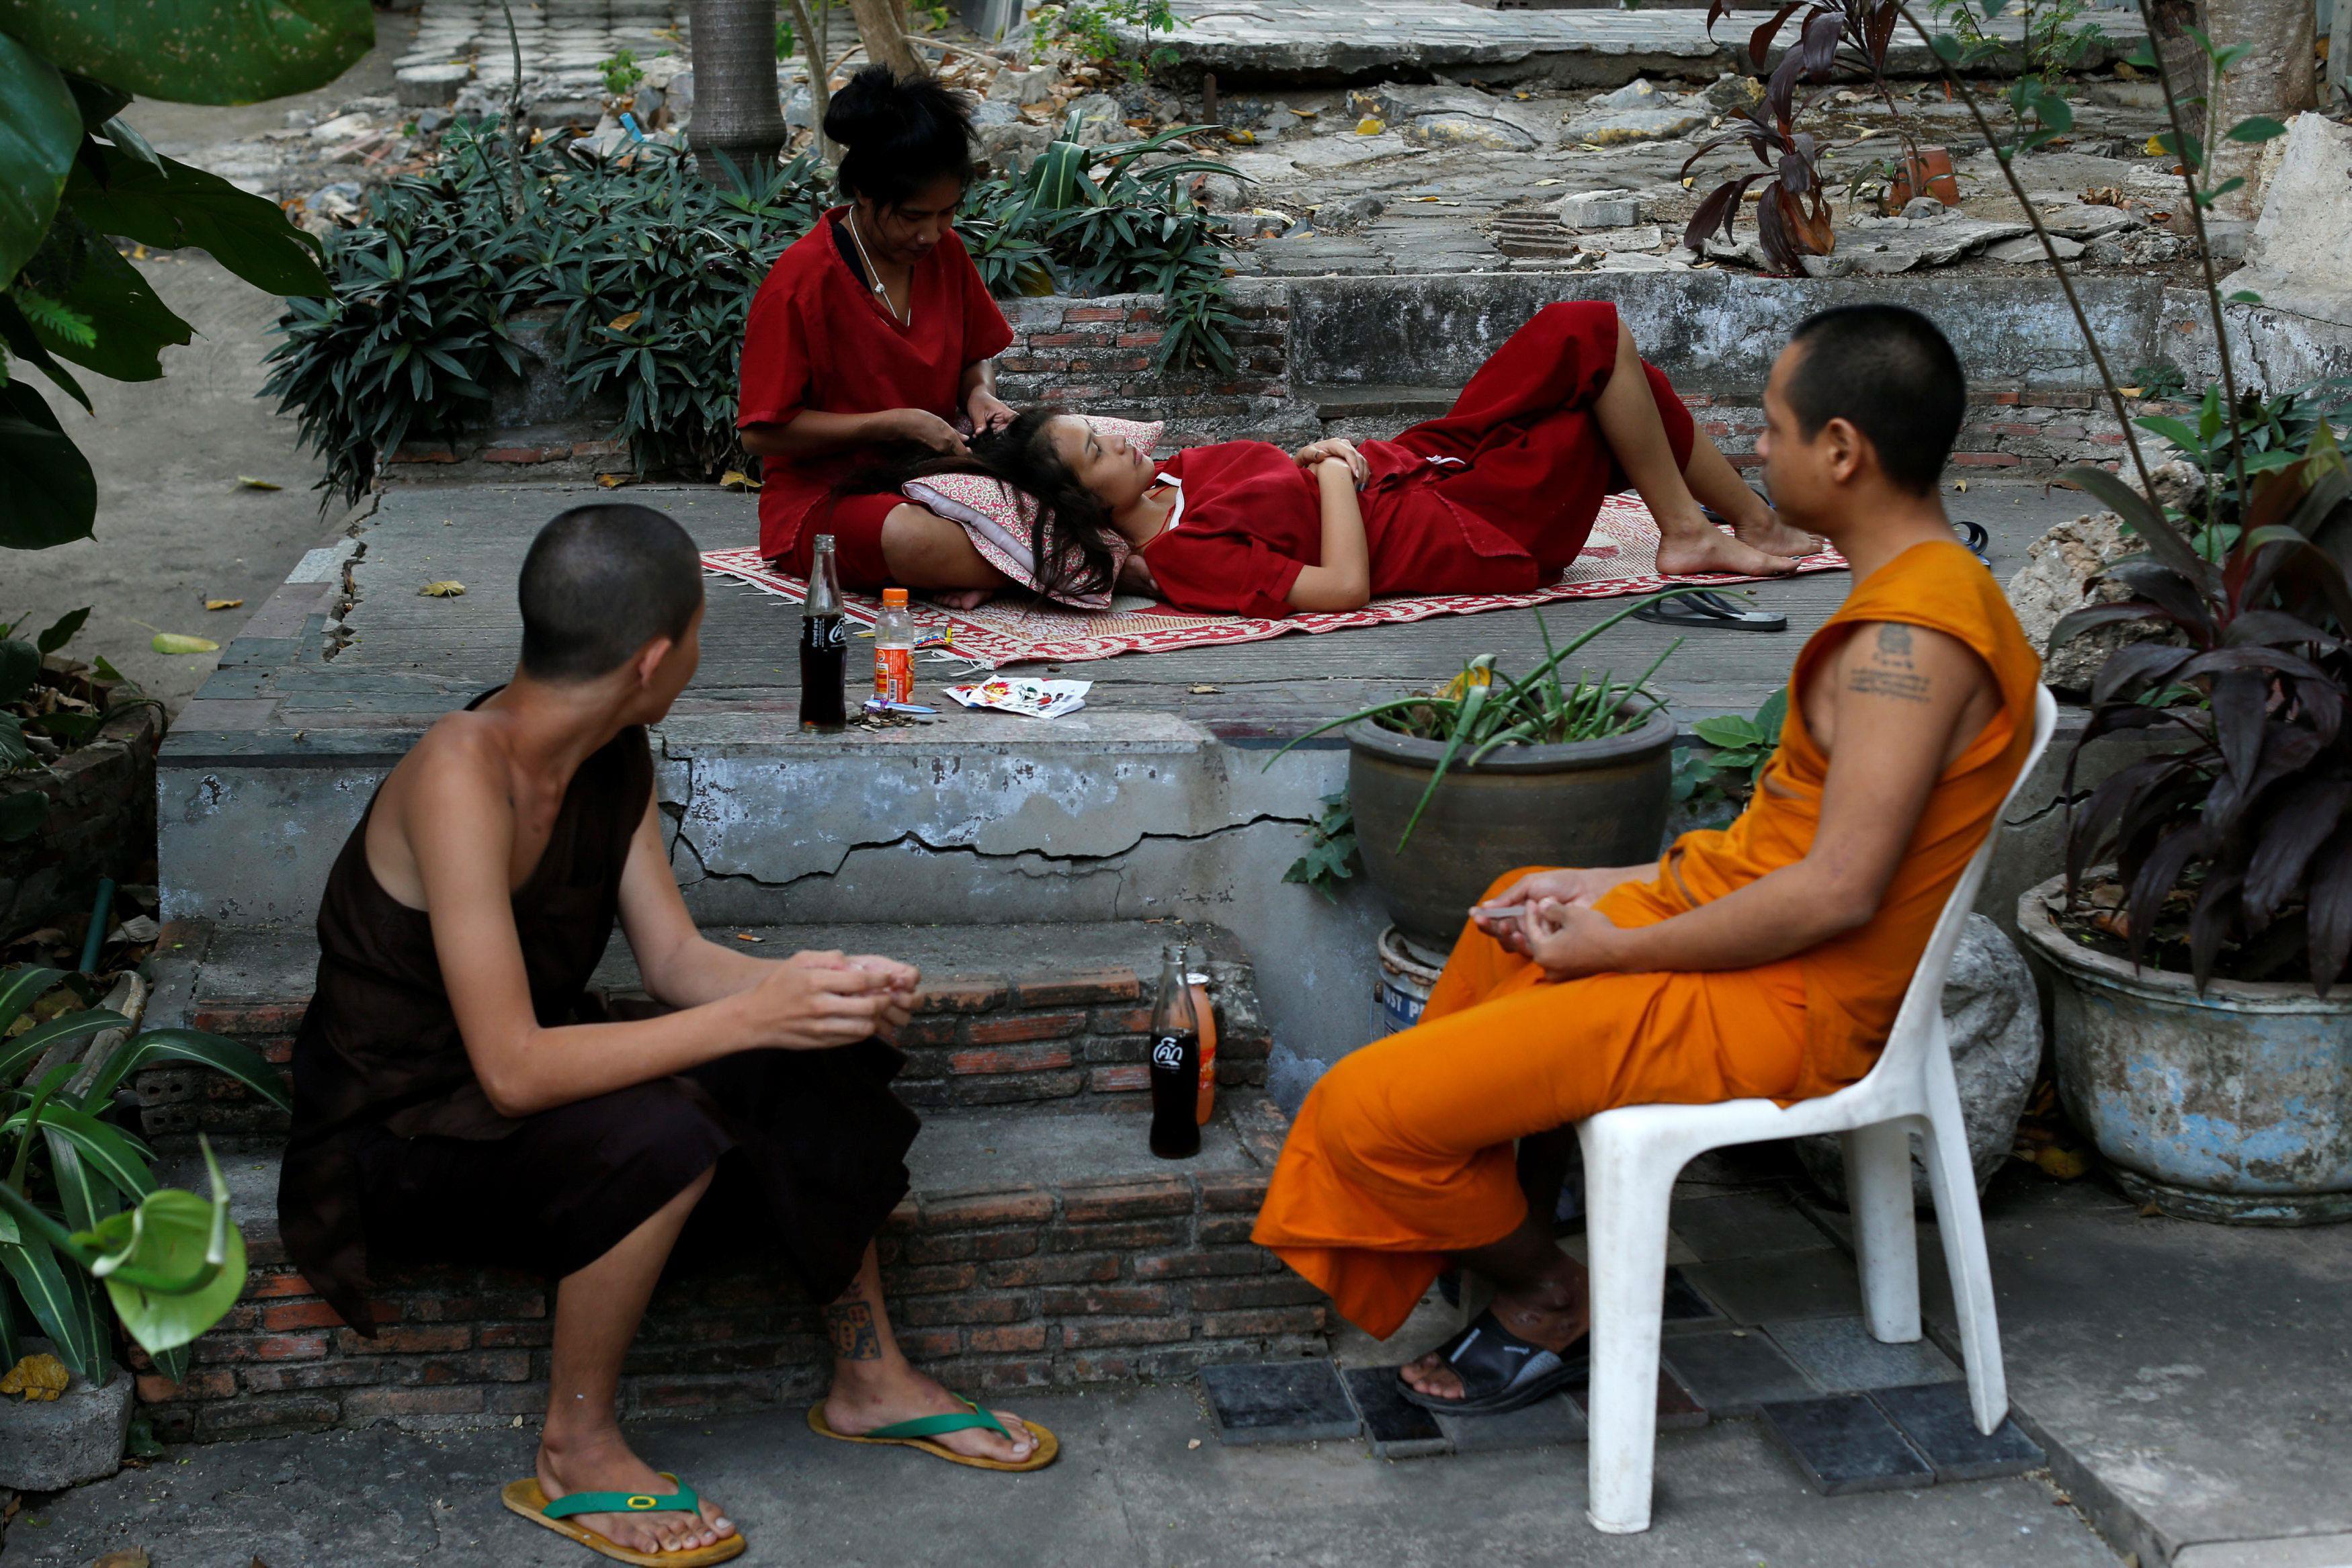 The Wider Image: Fighting addiction at a Thai monastery